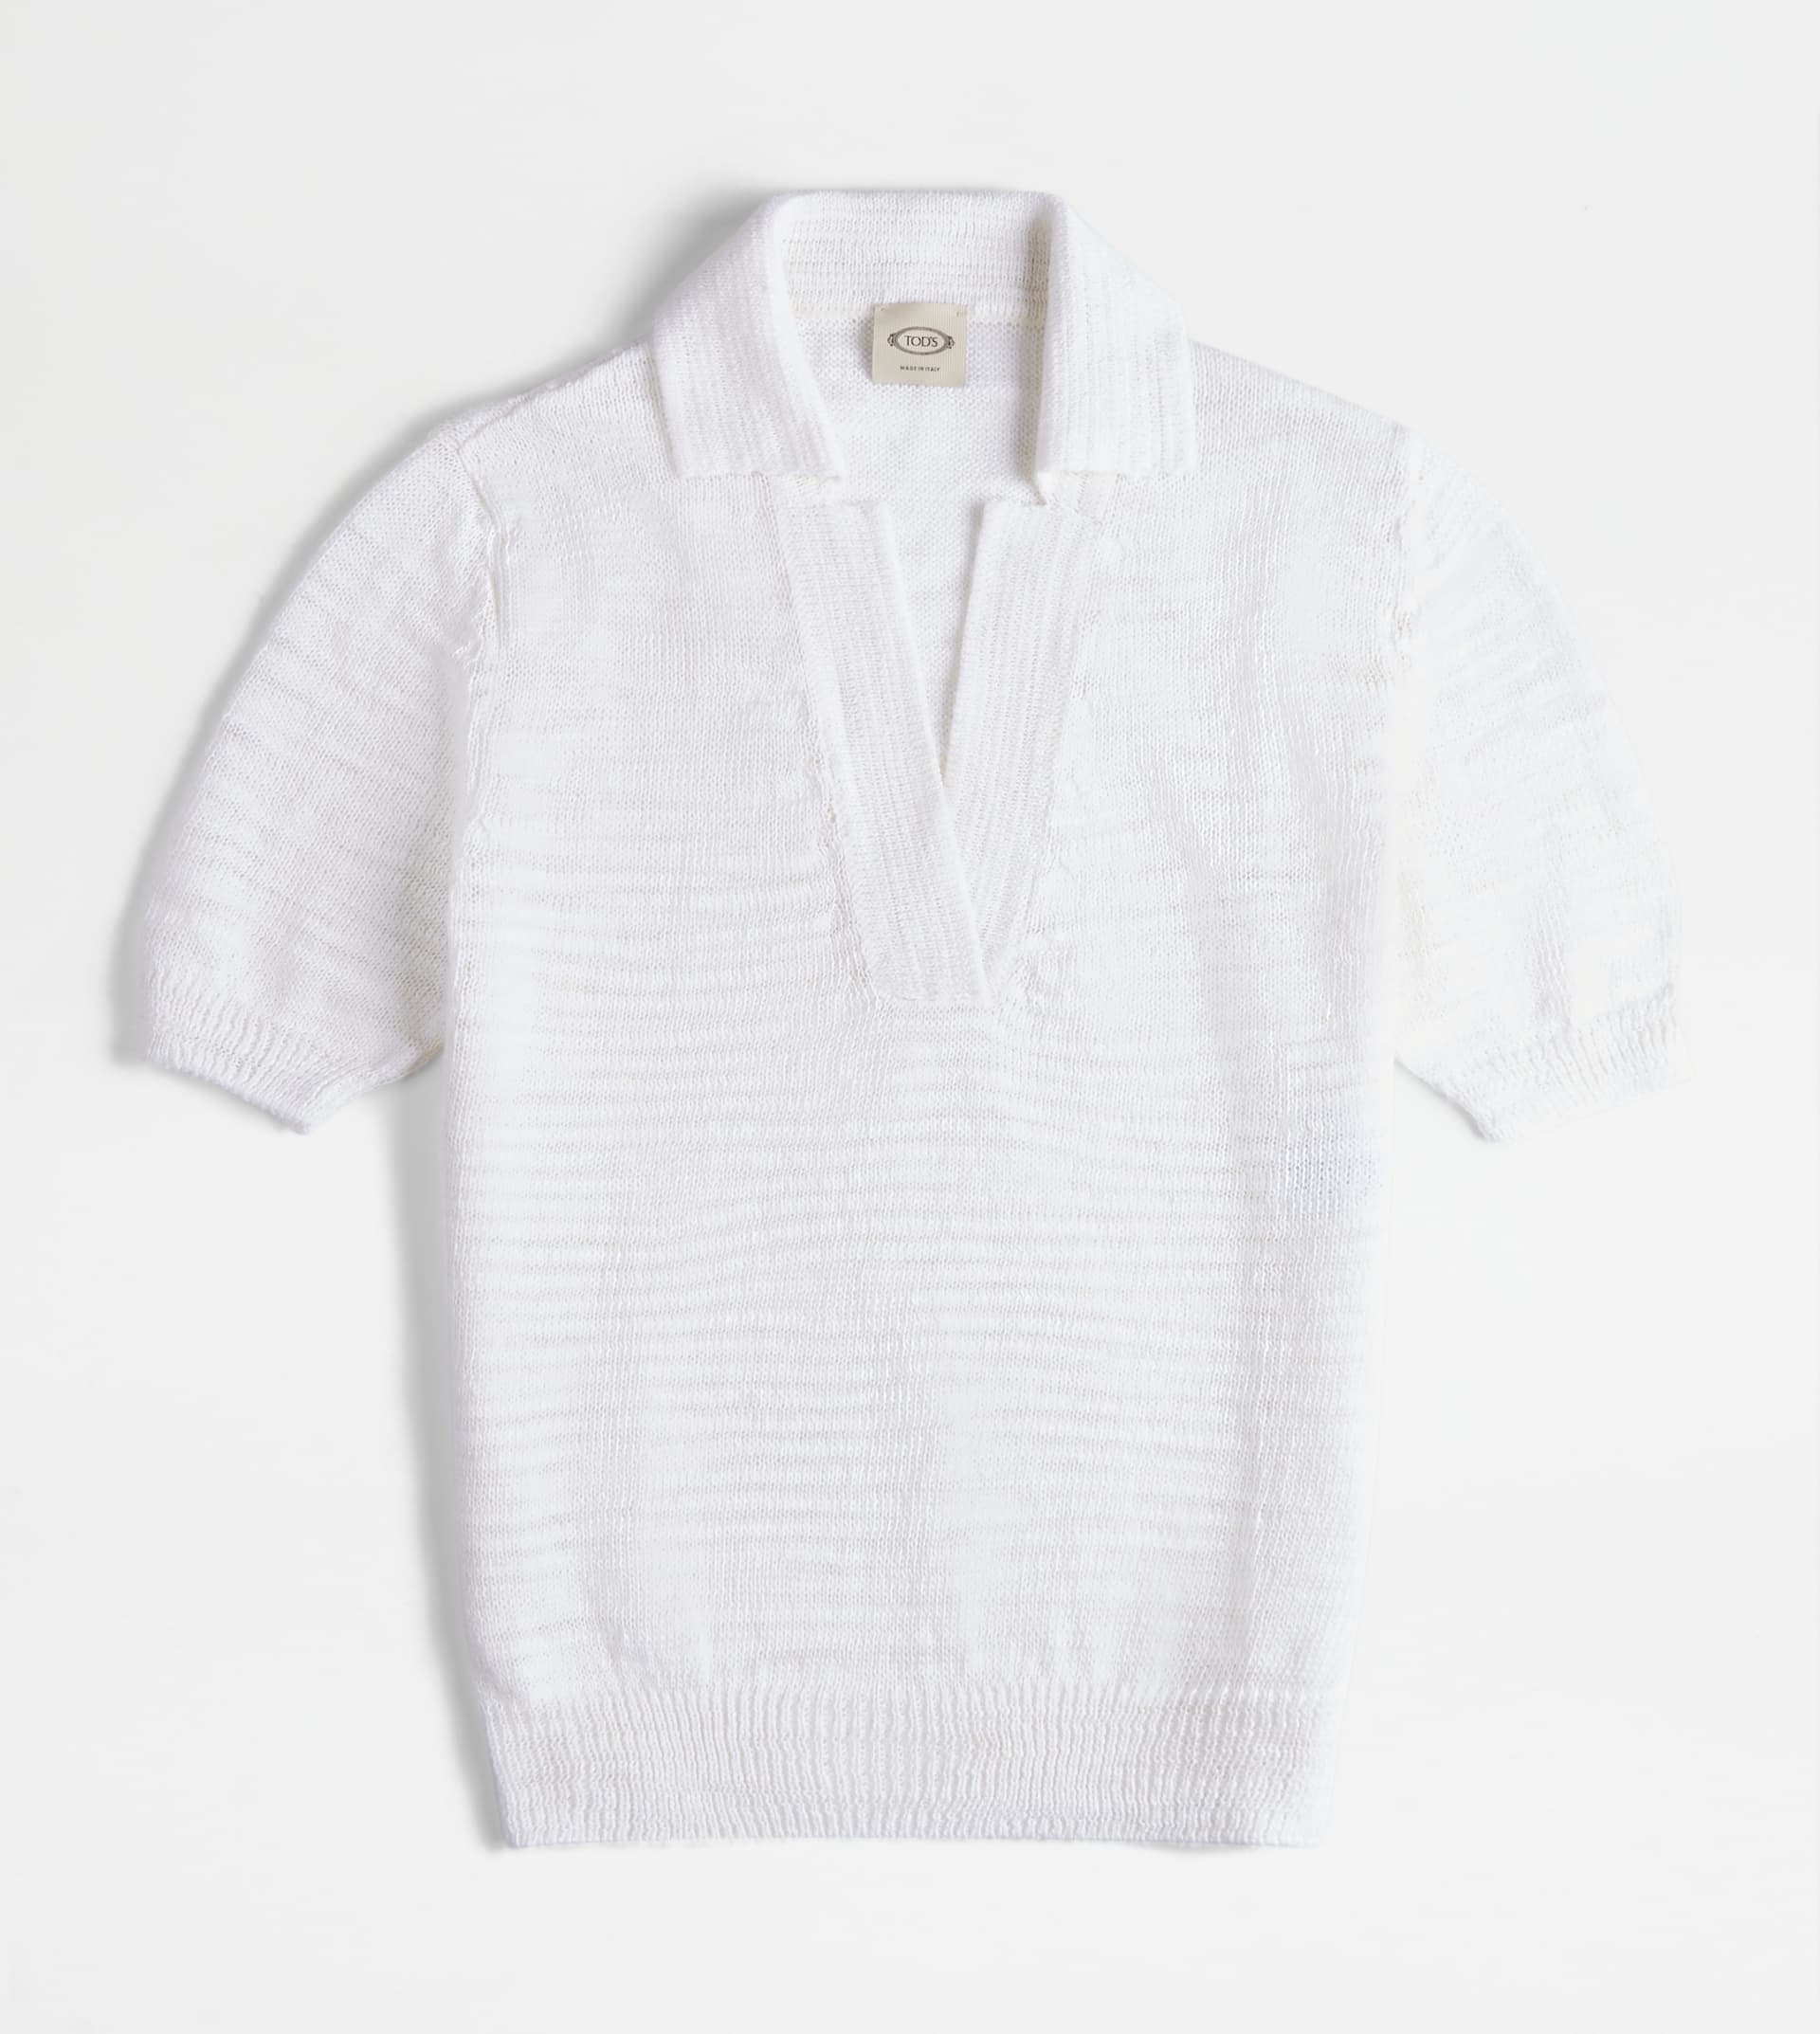 SHORT-SLEEVED POLO SHIRT IN KNIT - WHITE - 1